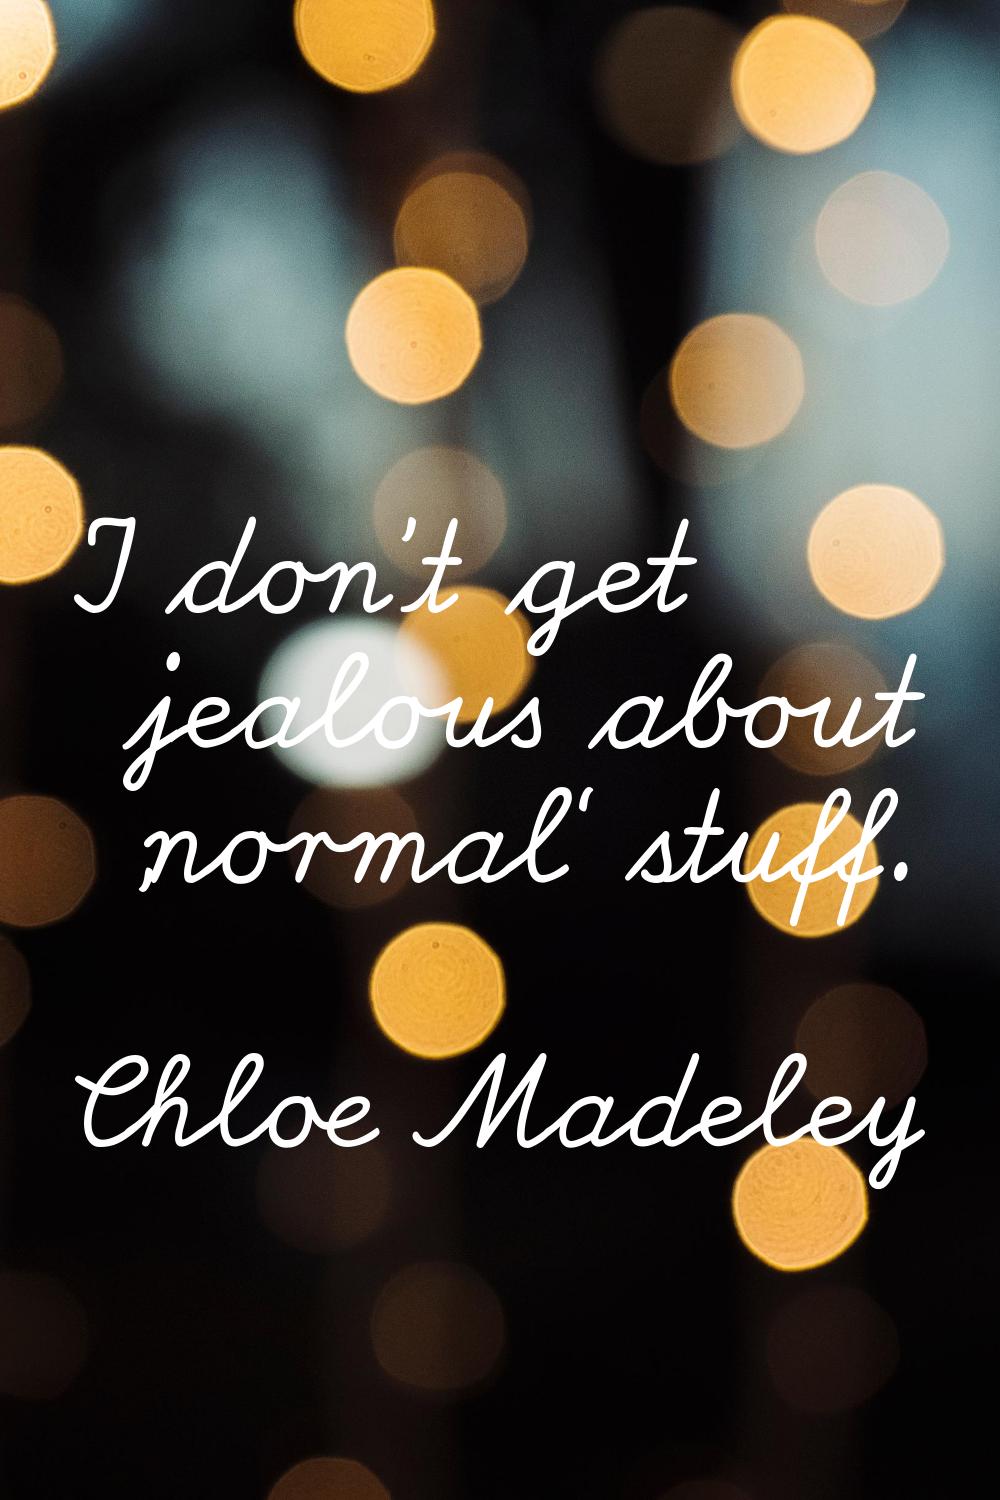 I don't get jealous about 'normal' stuff.